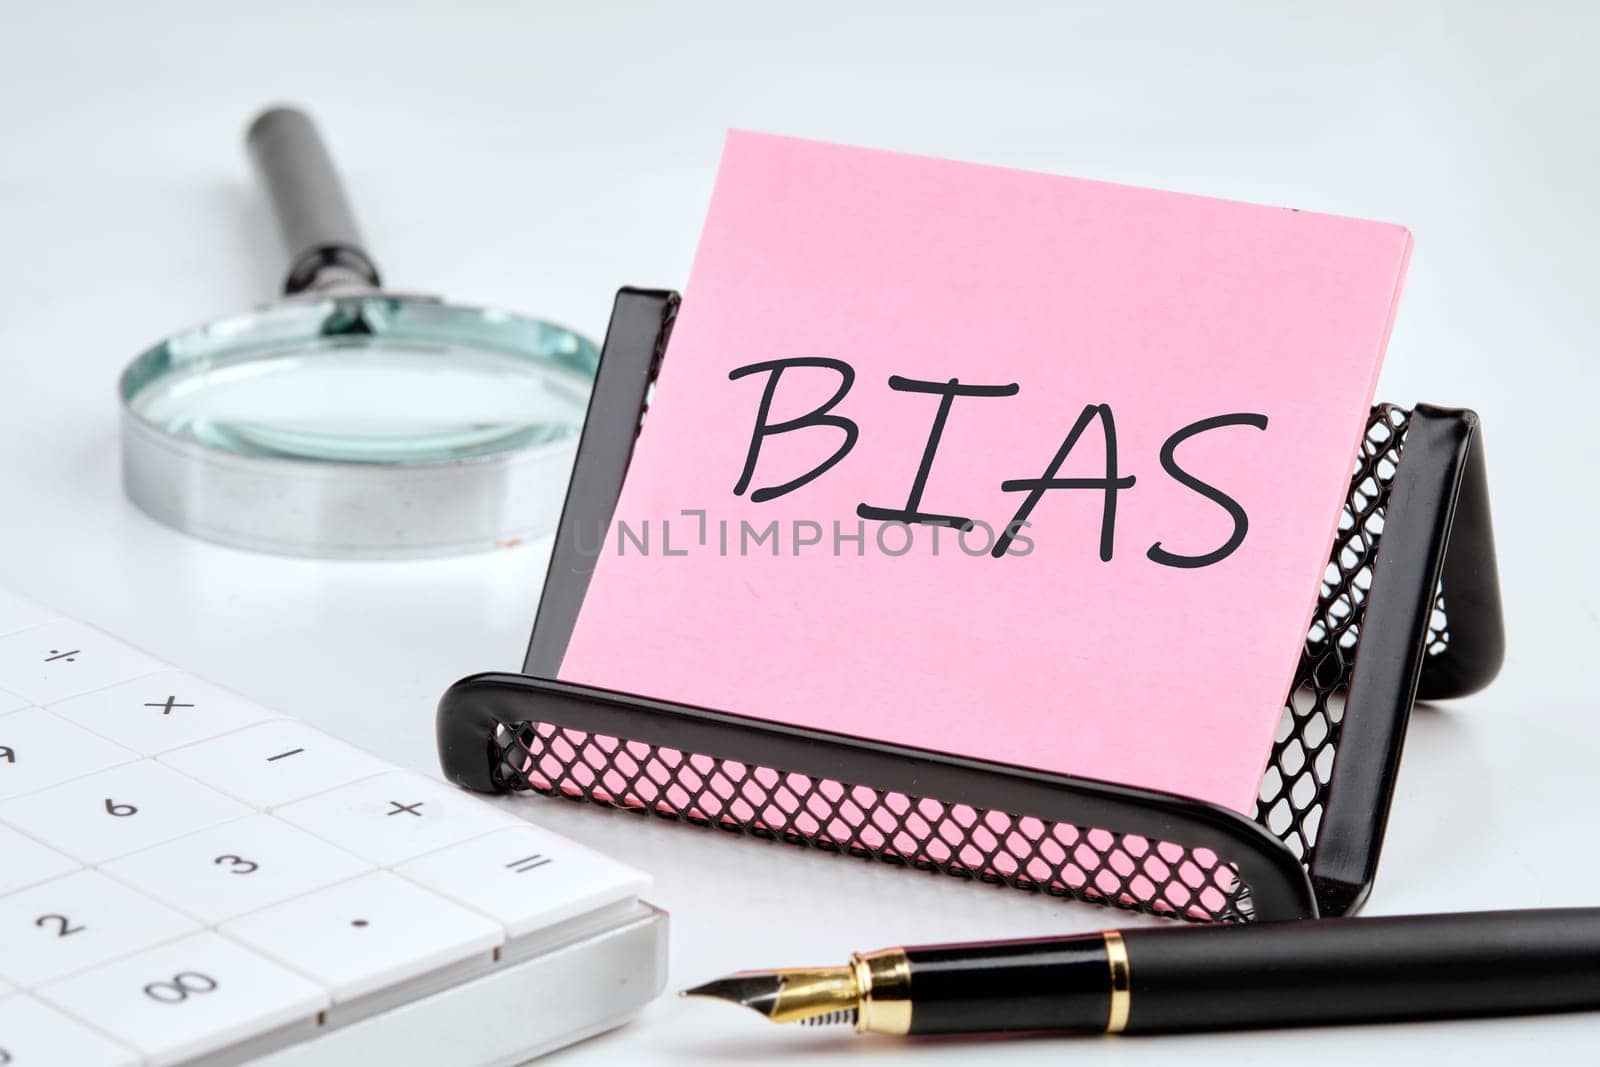 Bias word on the sticker on the stand on a white background next to a fountain pen, calculator and magnifying glass on a white background